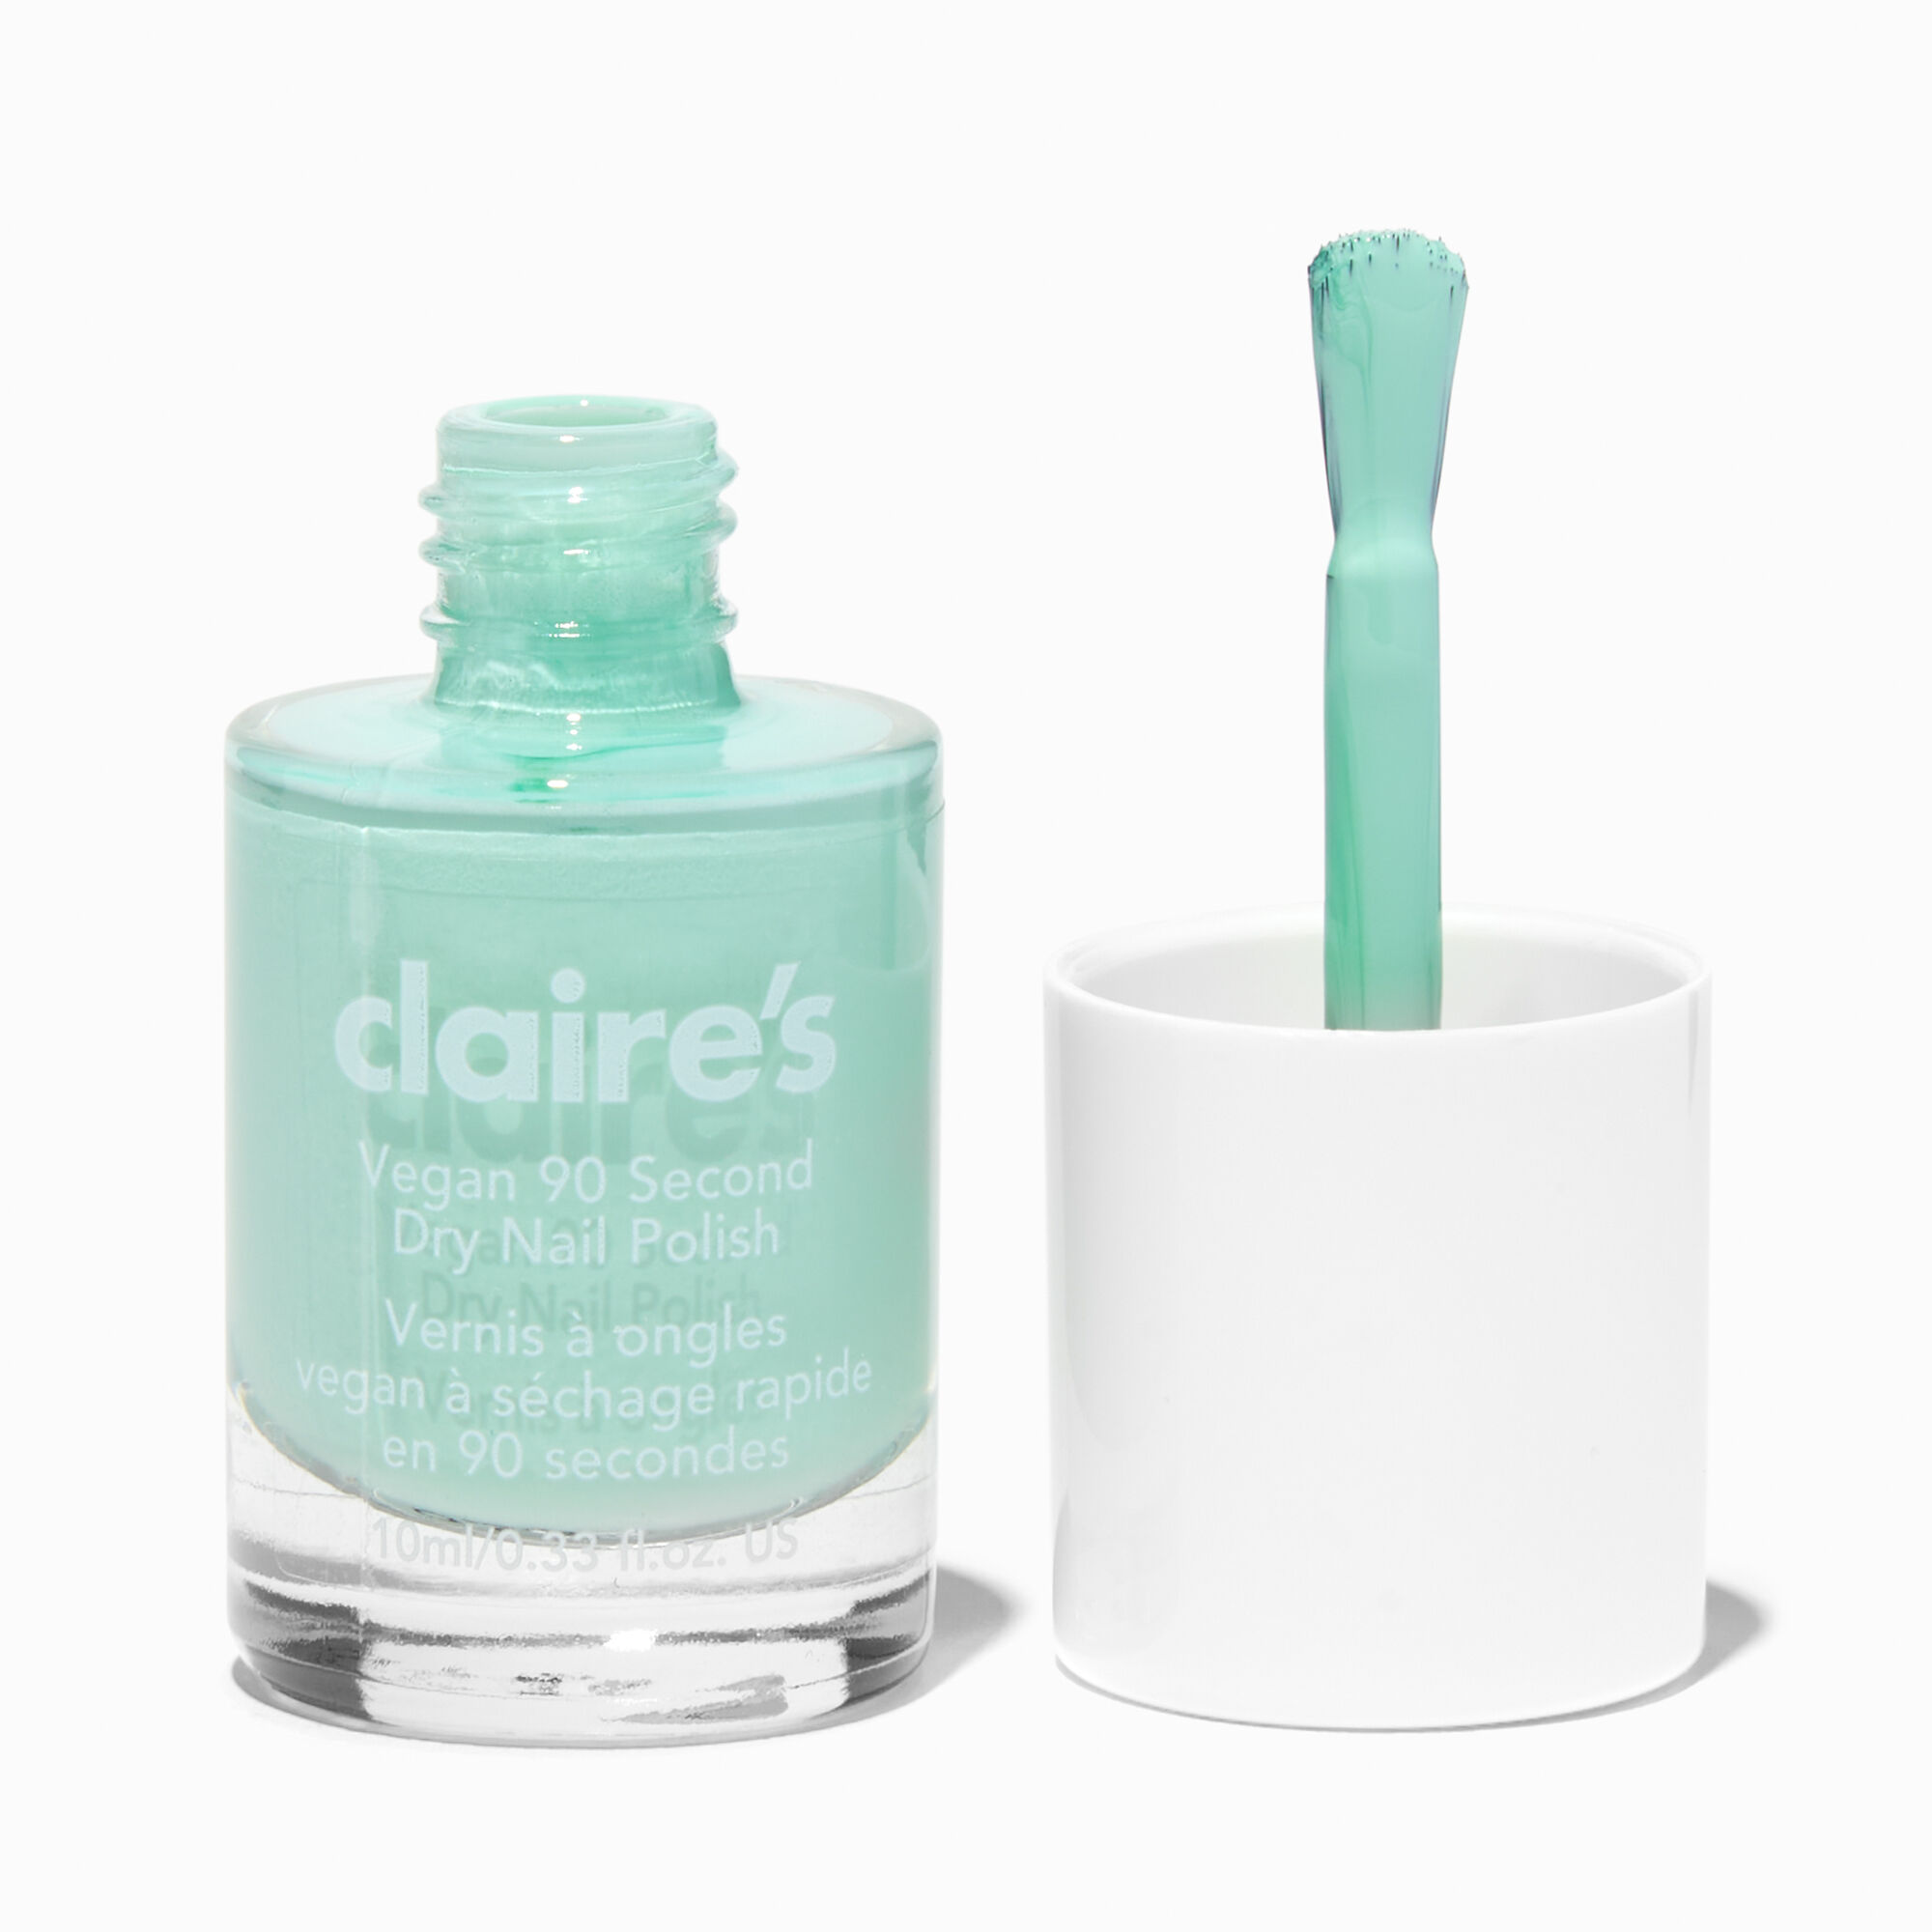 View Claires Vegan 90 Second Dry Nail Polish Keep It Breezy information